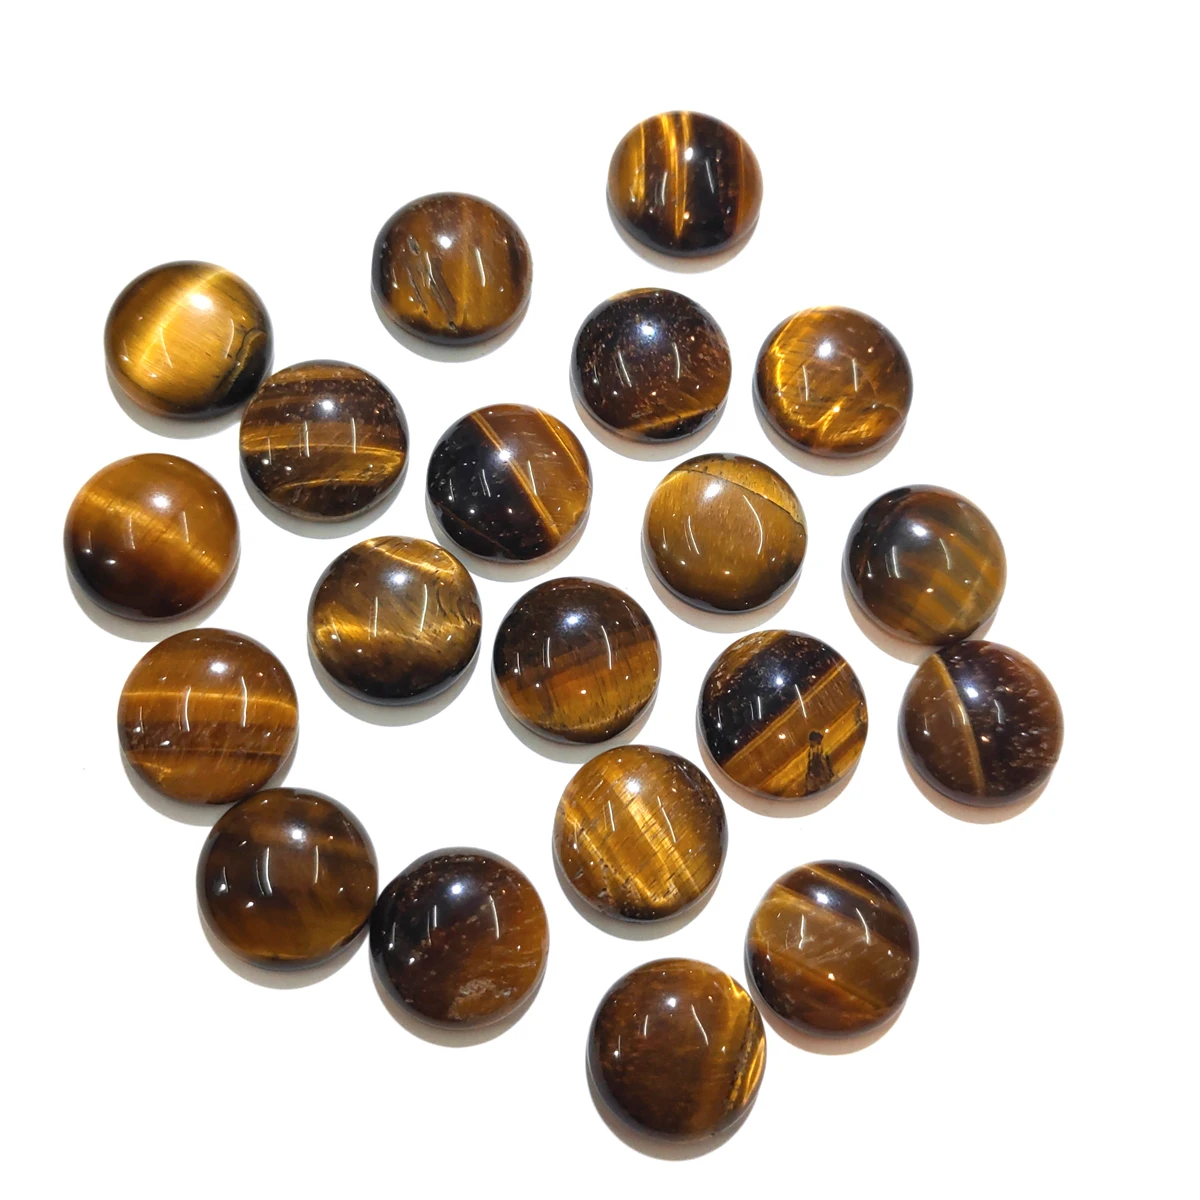 

10 PCS Tiger Eye Stone Natural Stones Cabochon 12mm 14mm 16mm 18mm 20mm Round No Hole for Making Jewelry DIY